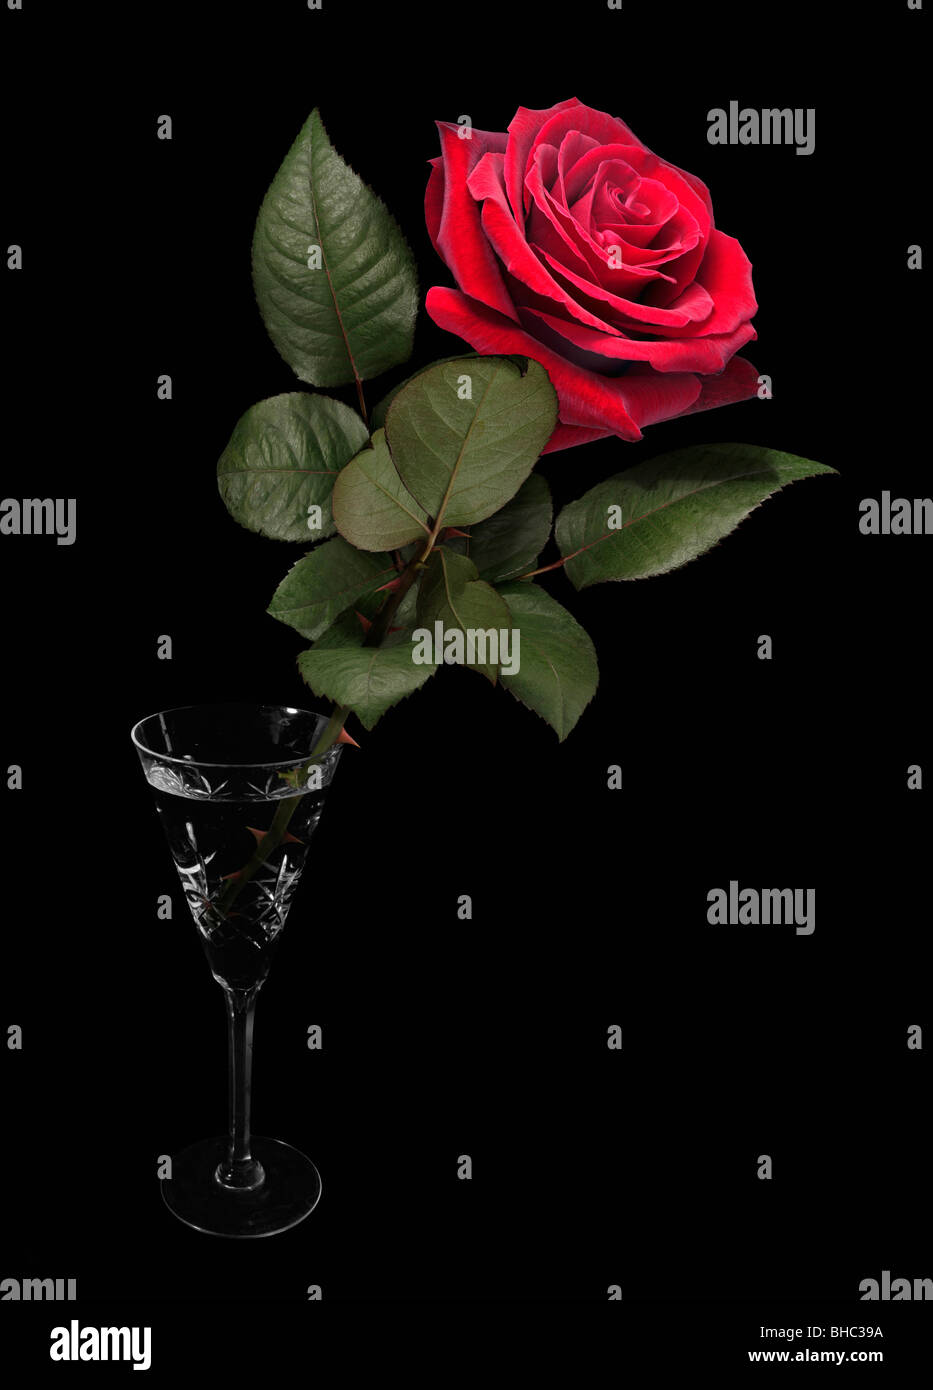 red rose in a glass with black background Stock Photo - Alamy